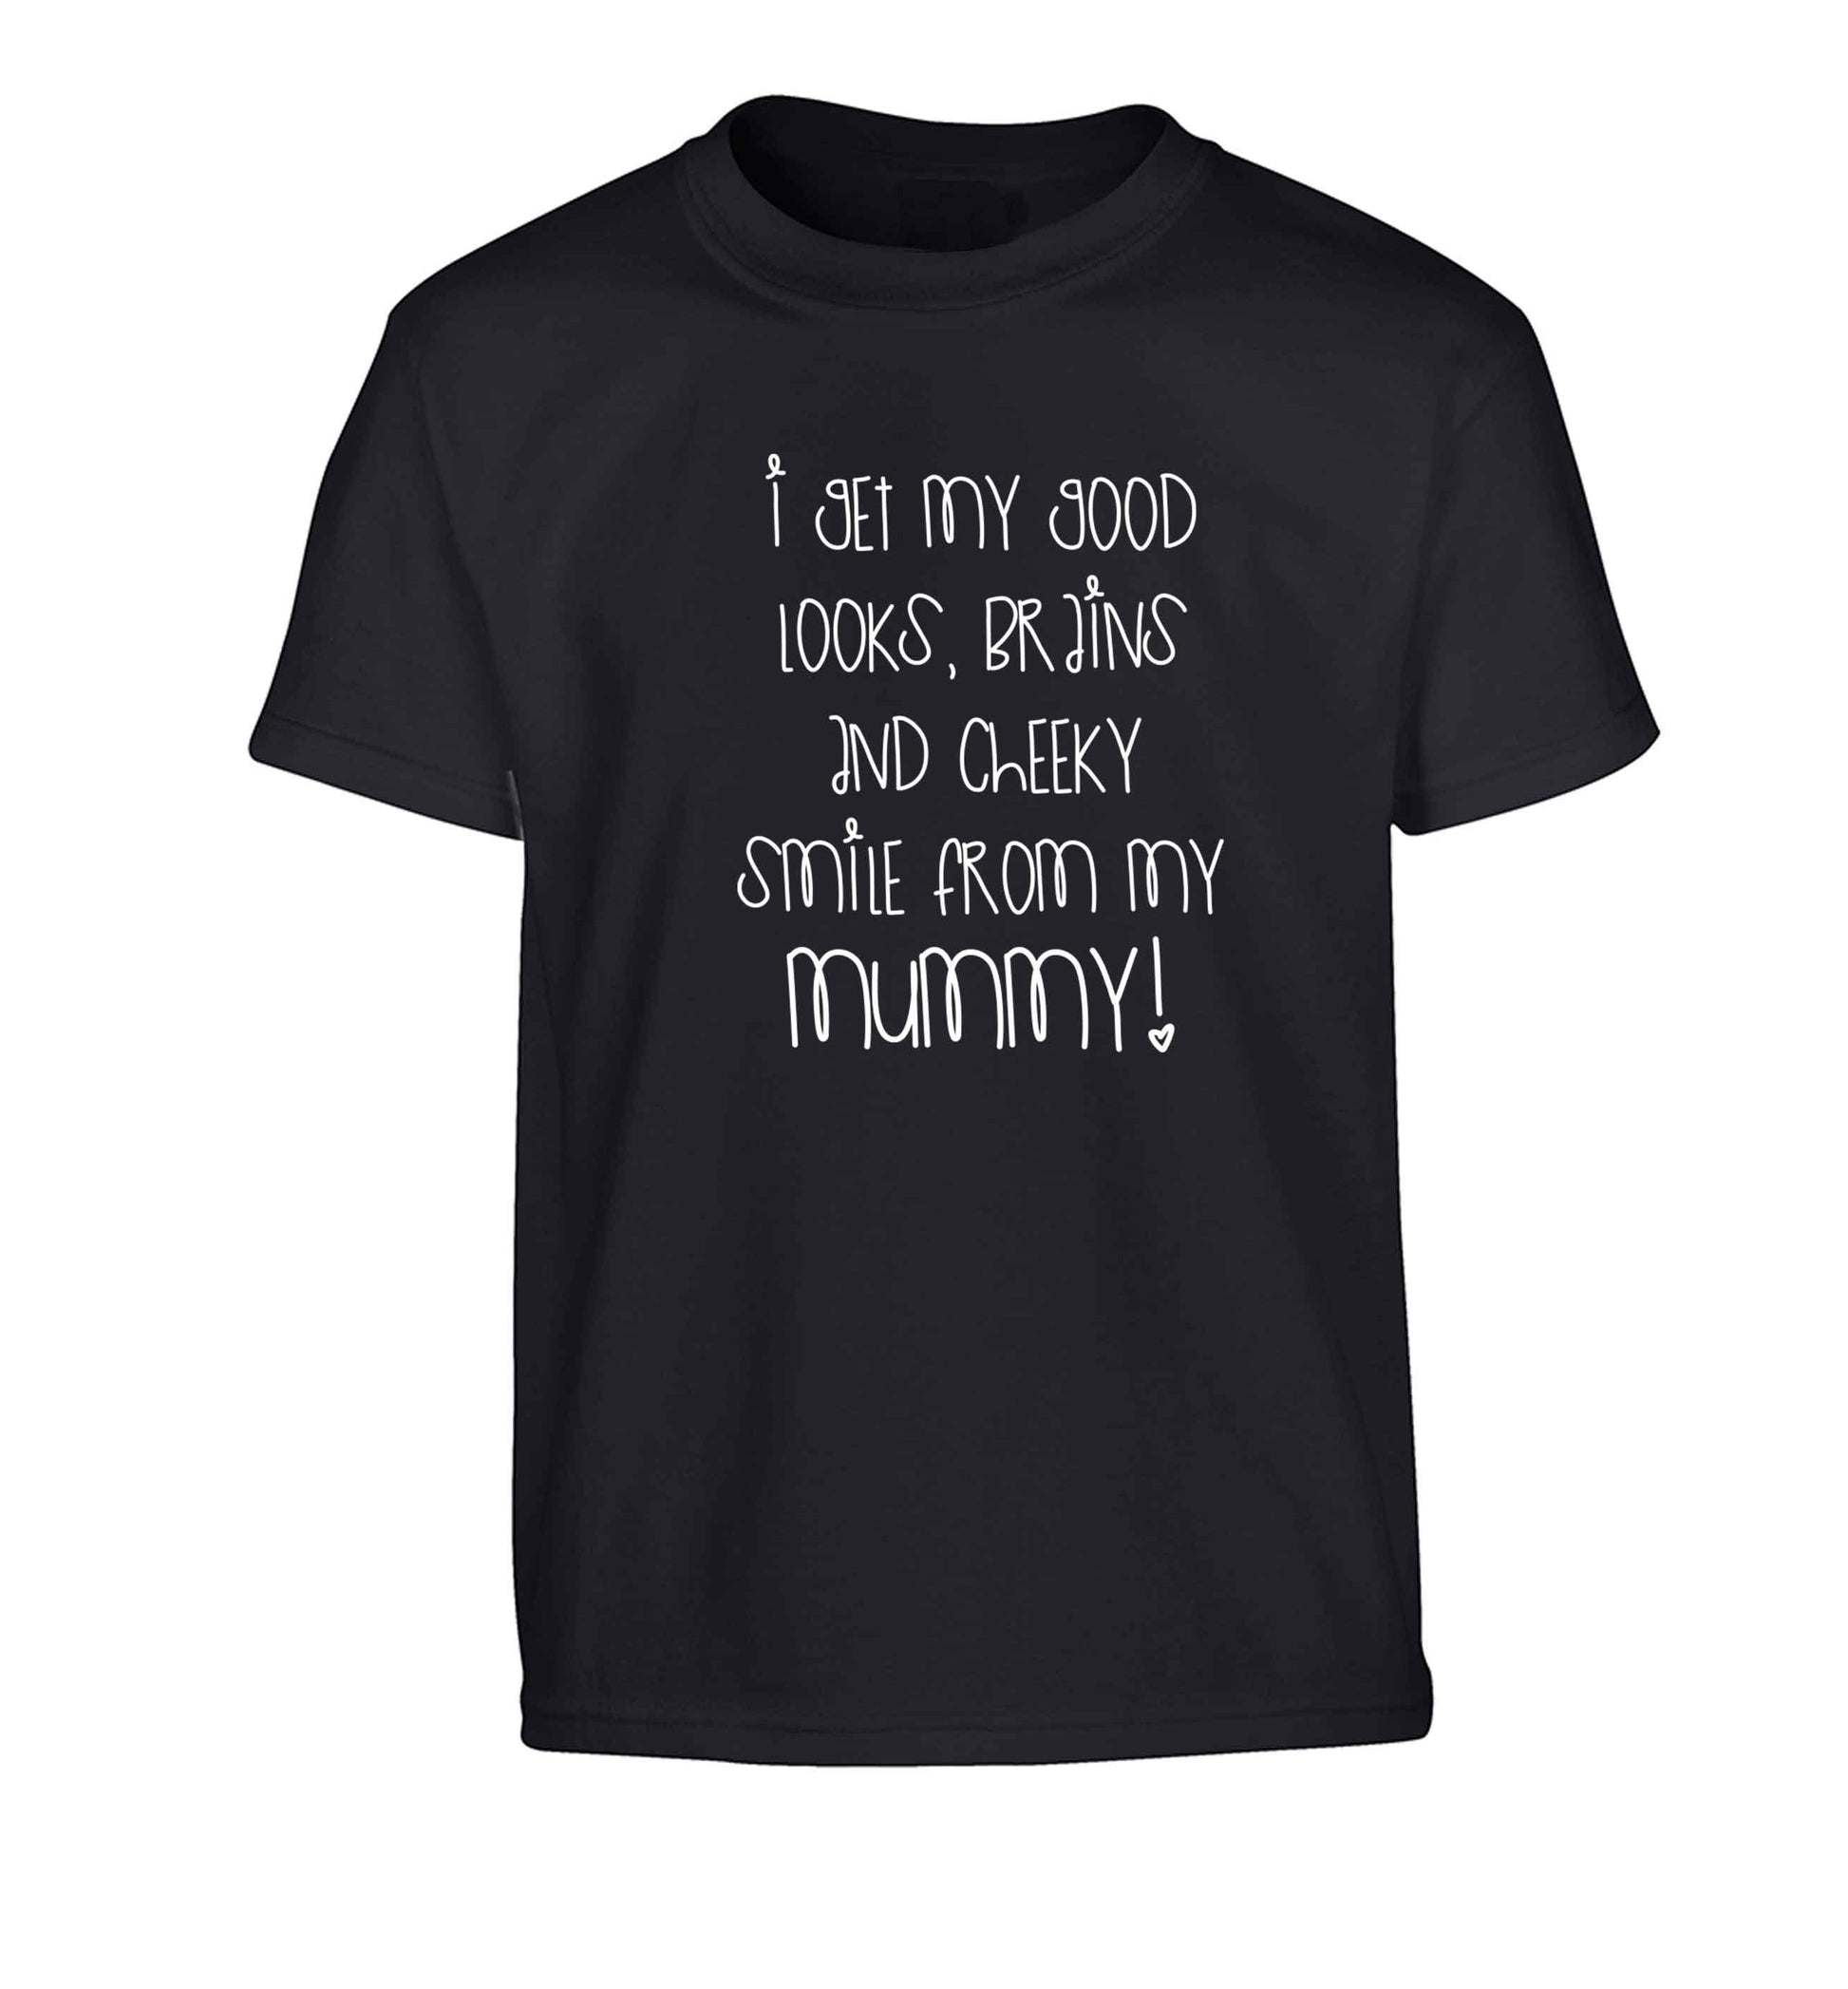 I get my good looks, brains and cheeky smile from my mummy Children's black Tshirt 12-13 Years